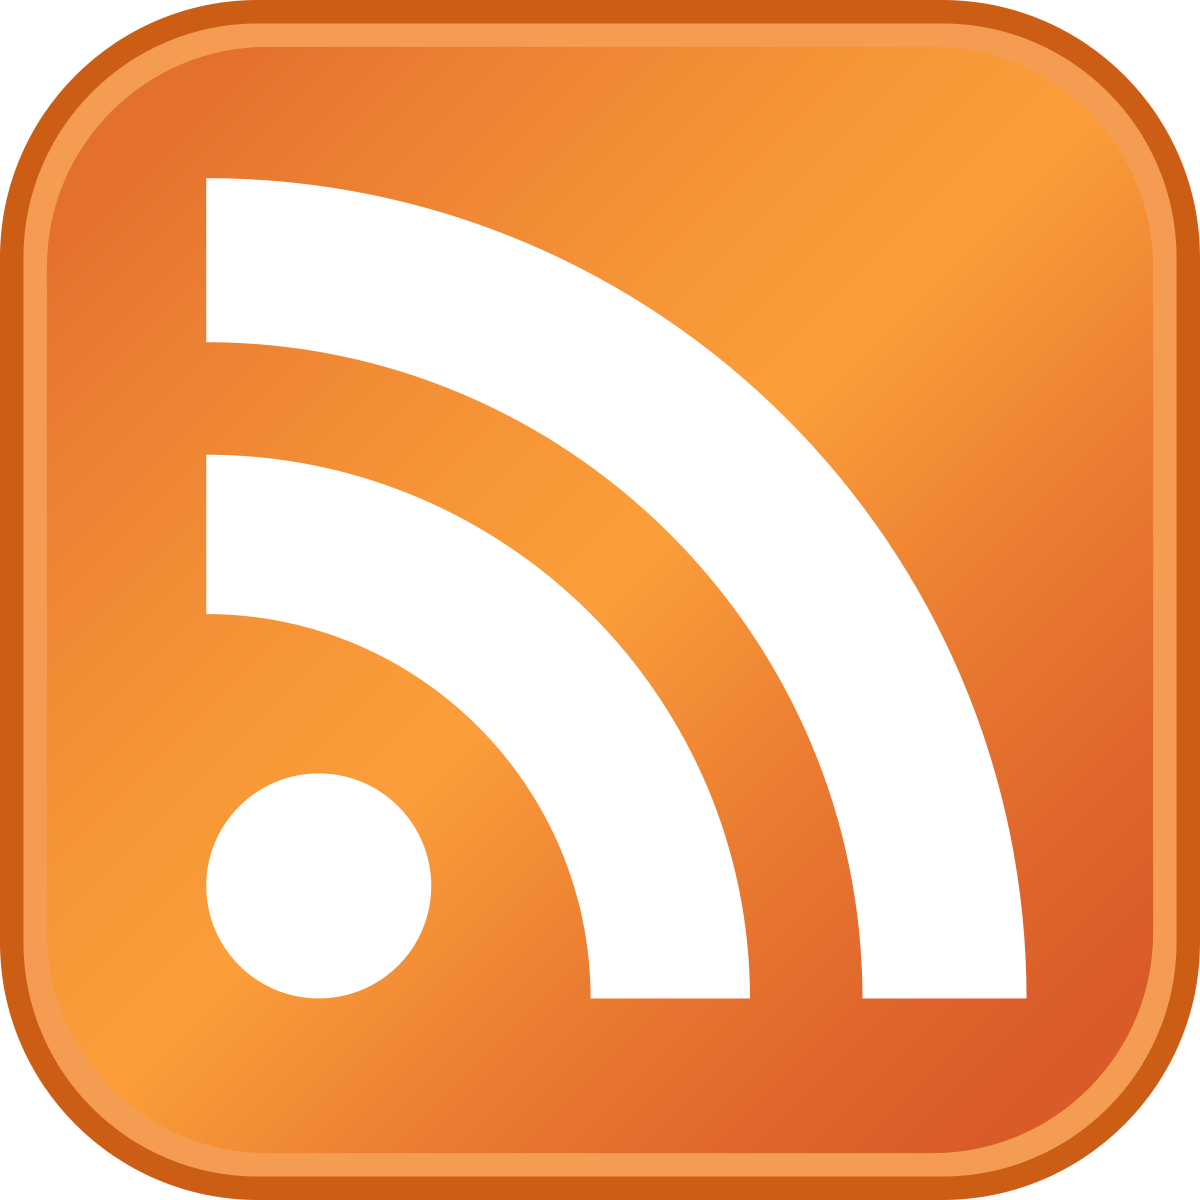 creating rss feed for website